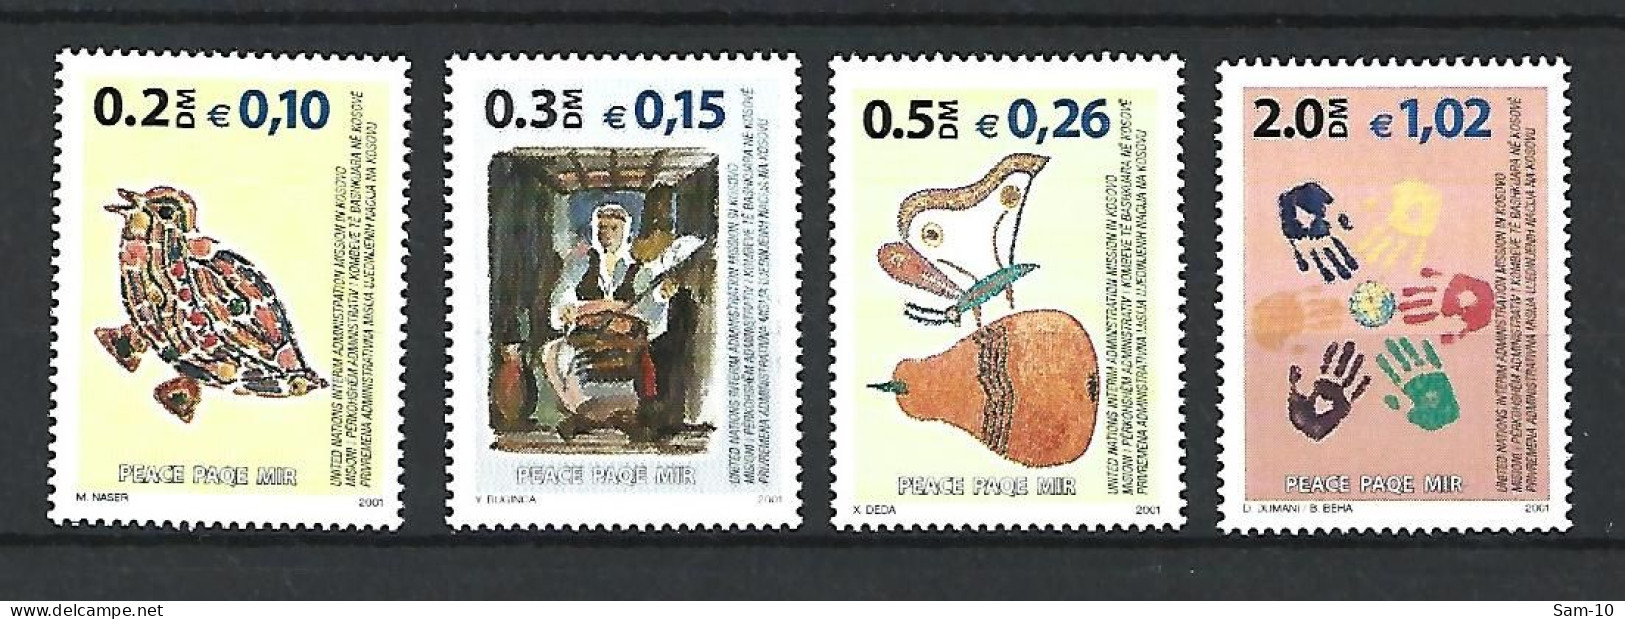 Timbre  Nation Unies  Kosovo  En Neuf **  N 6/10 Manque Le 9 - Unused Stamps